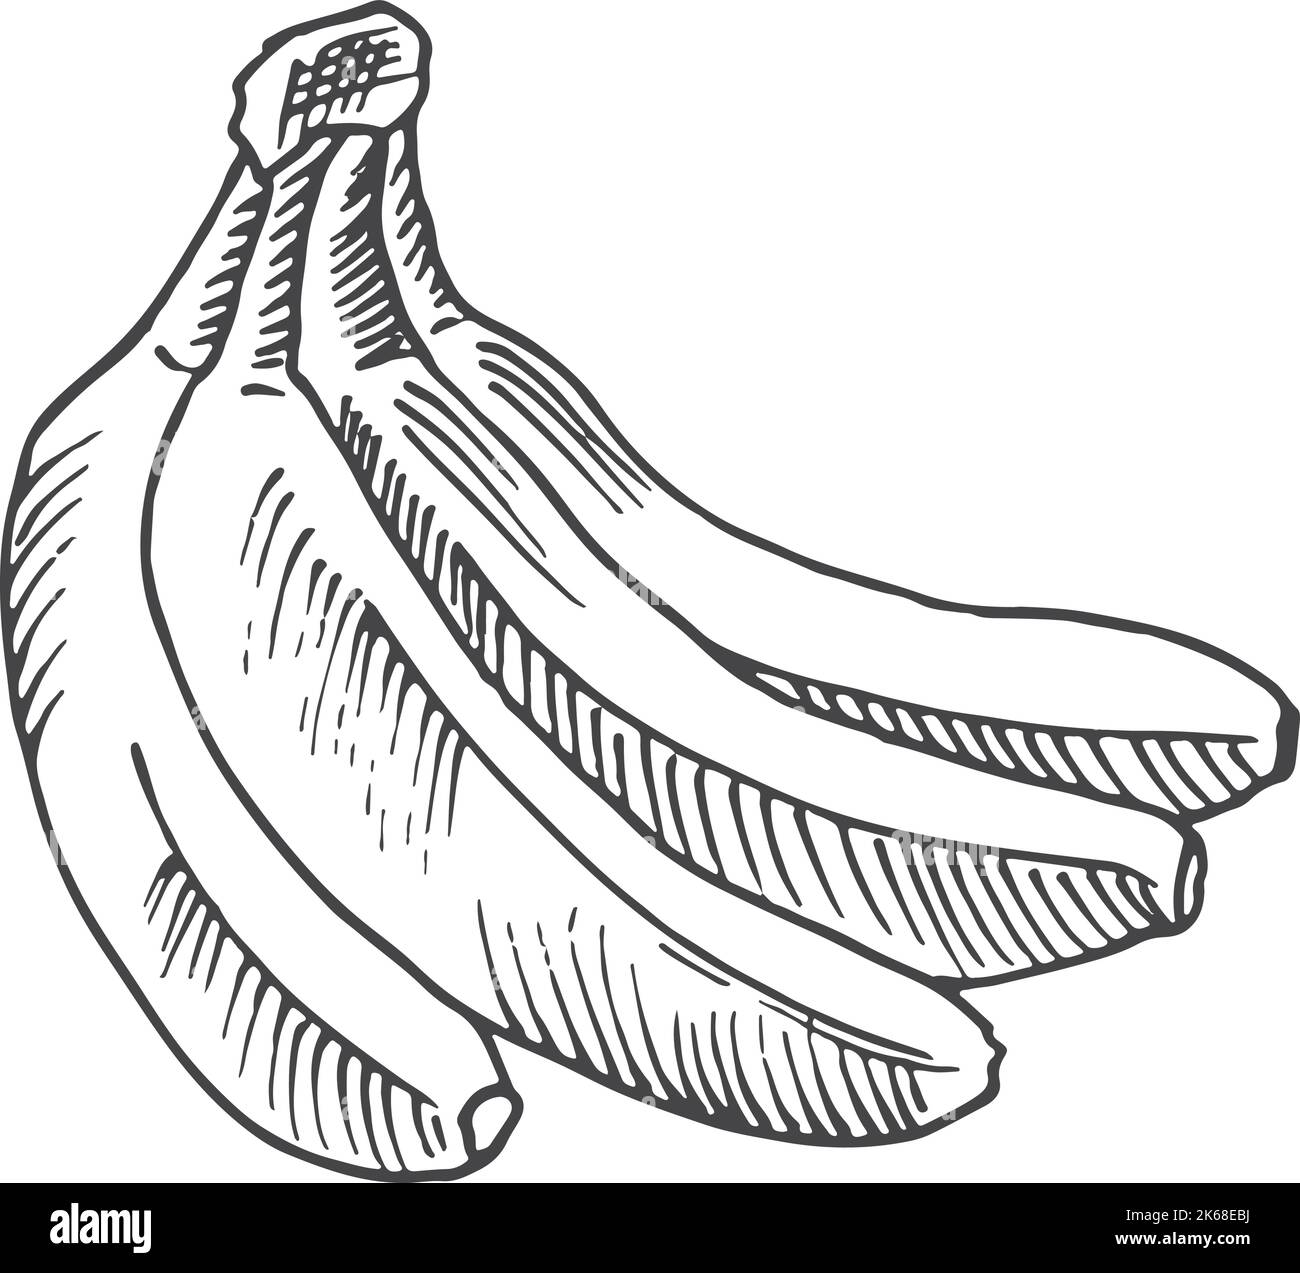 How to Draw a Banana Step by Step - EasyLineDrawing